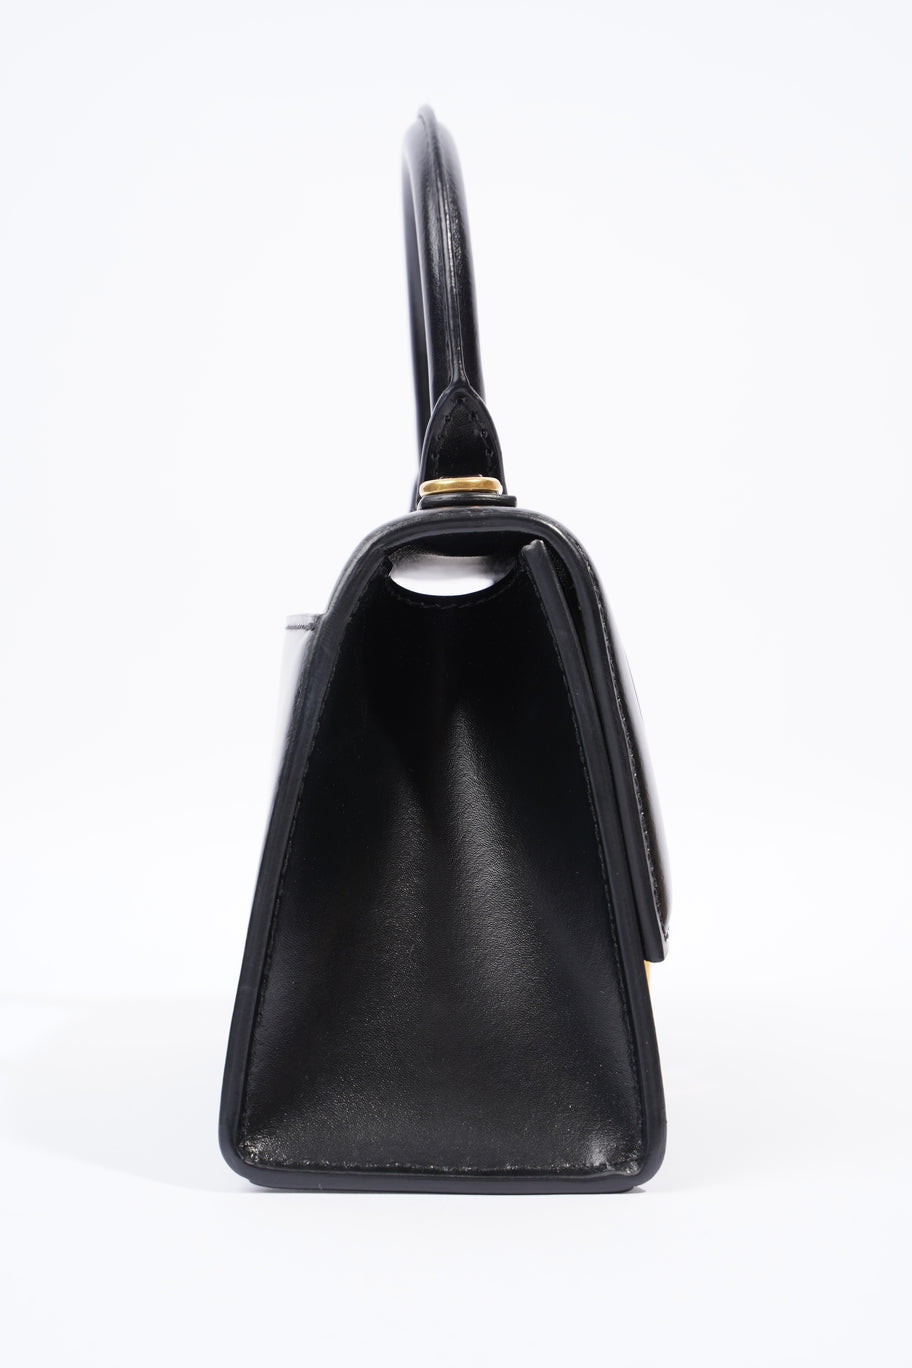 Hourglass Black Leather XS Image 8